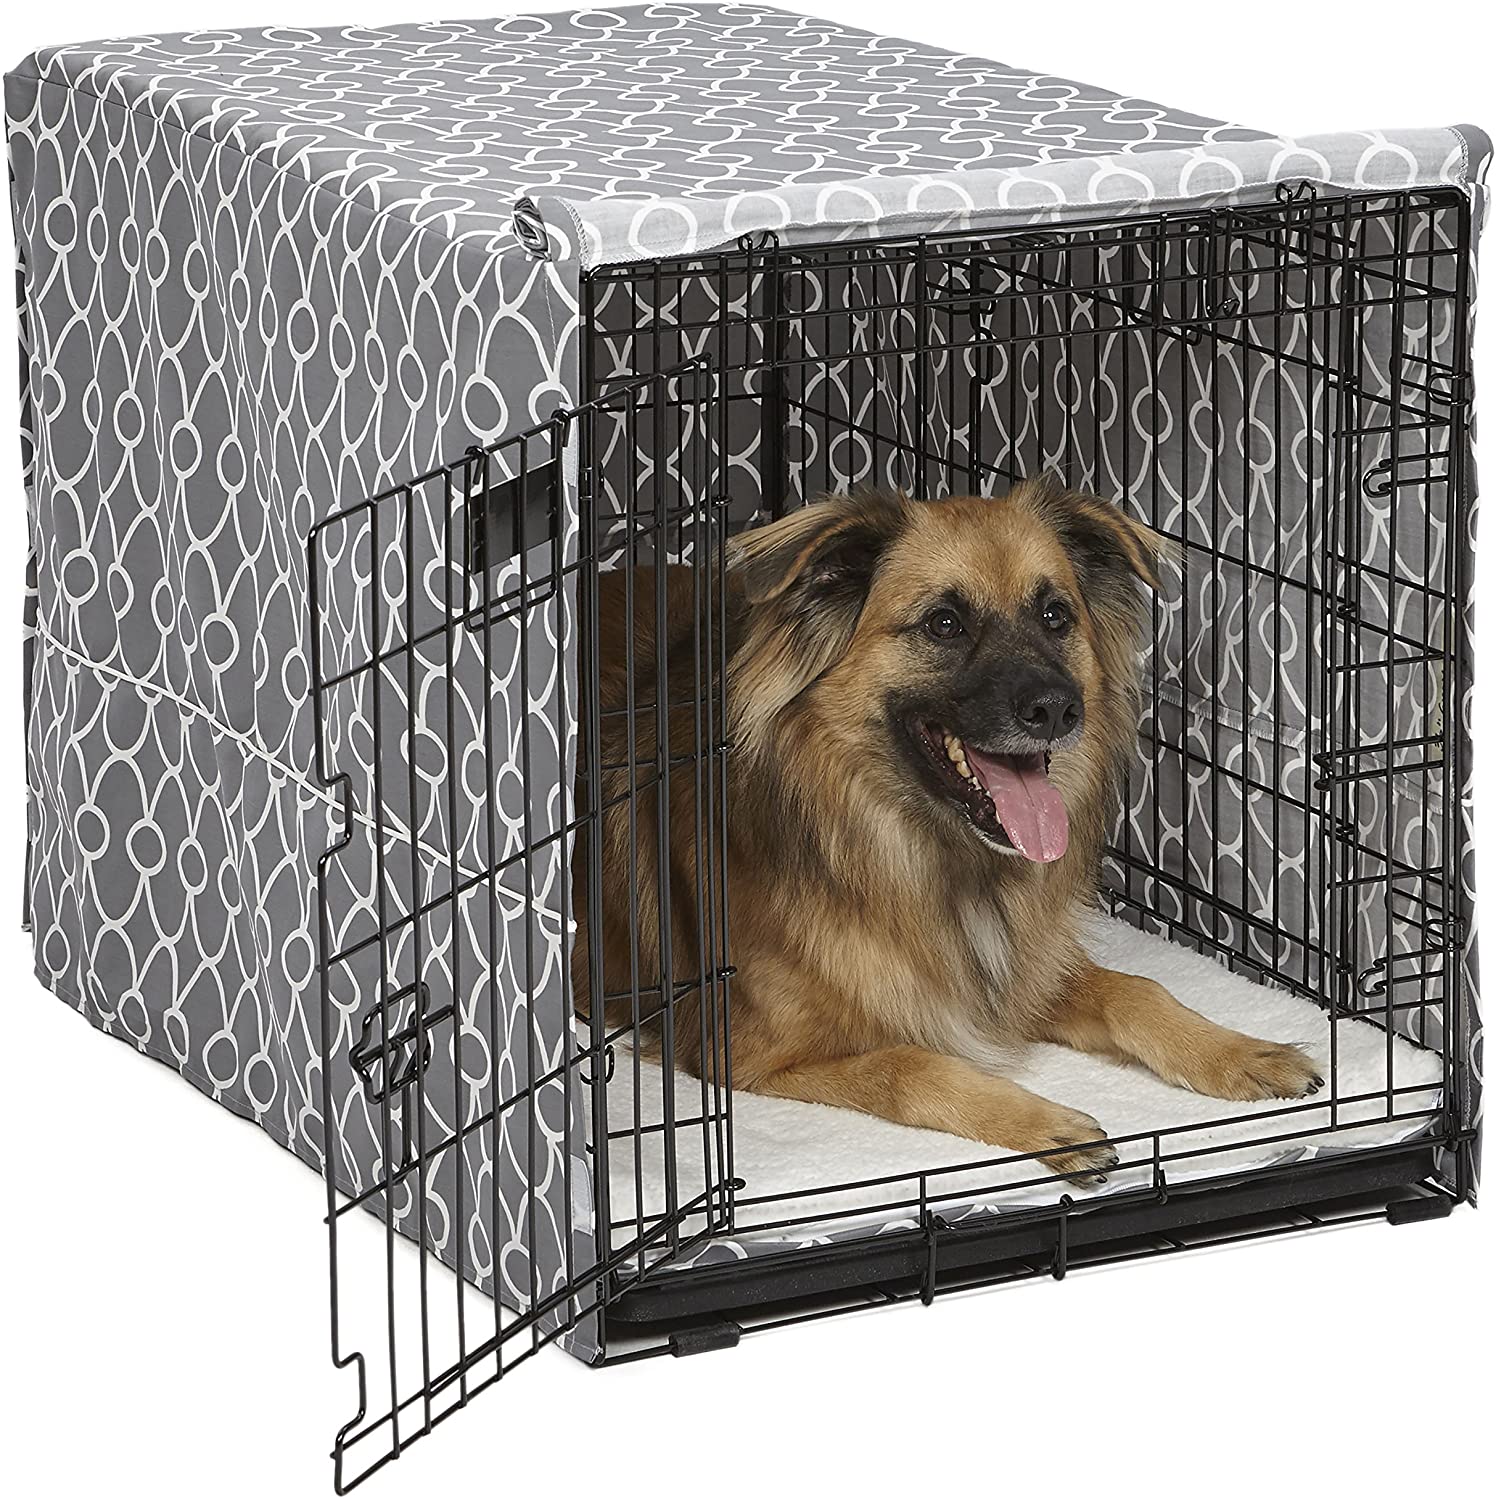 Take Off Frosted Cloth Windproof Pet Kennel Cover Provided for Wire Crate Indoor Outdoor Protection Easy to Put On QEES Dog Crate Covers for Wire Crates 